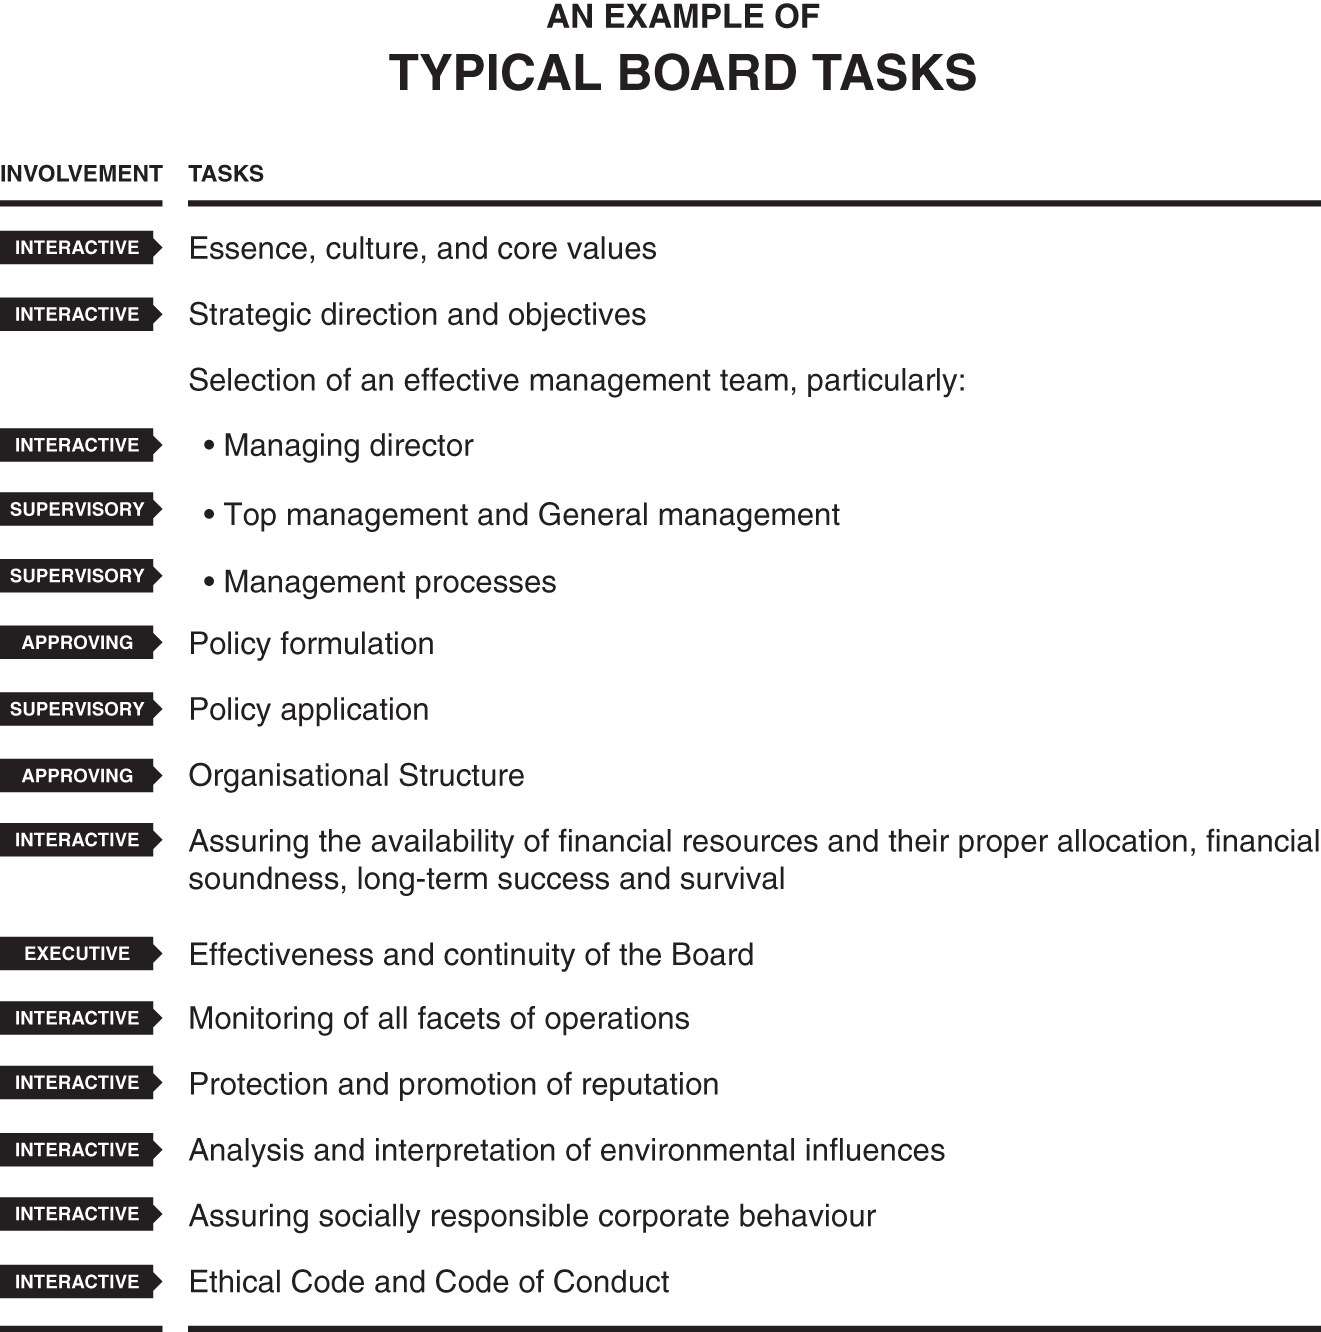 Illustration highlighting some of the typical tasks that boards undertake, for interactive, supervisory, and approving involvements.